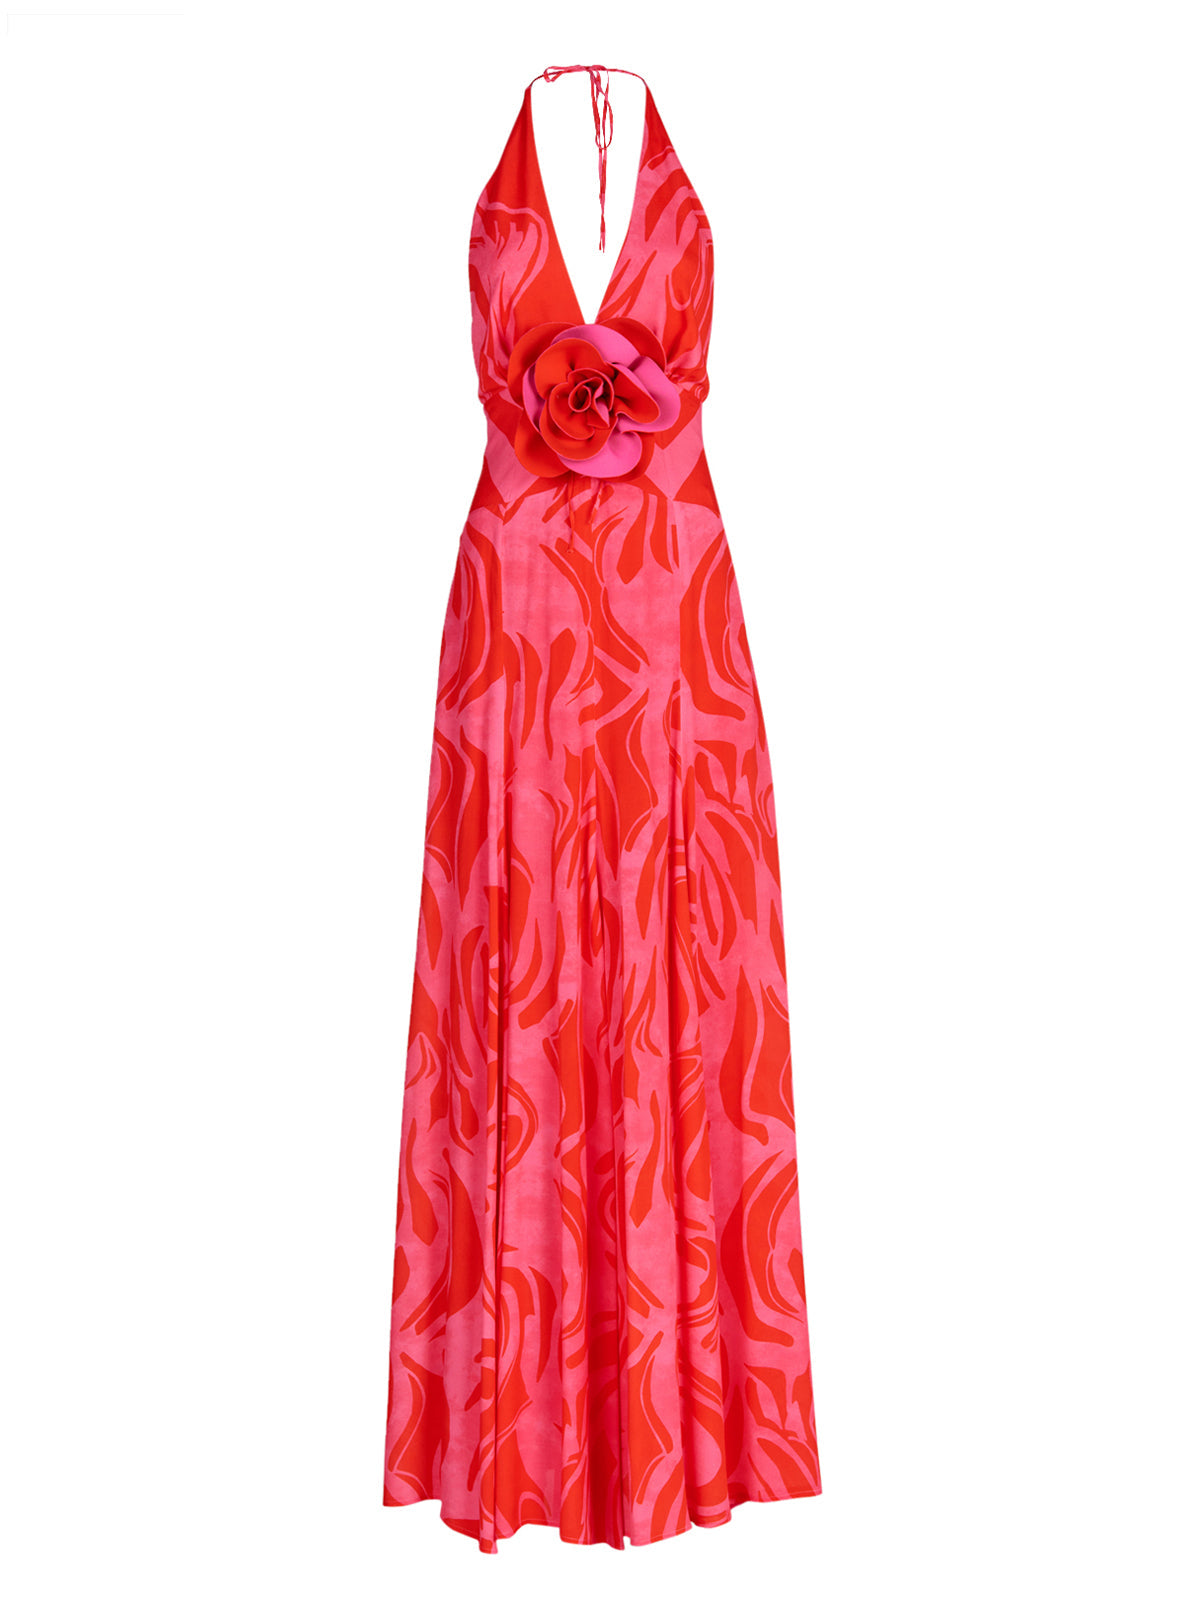 Tawny Dress Pink Red Marble